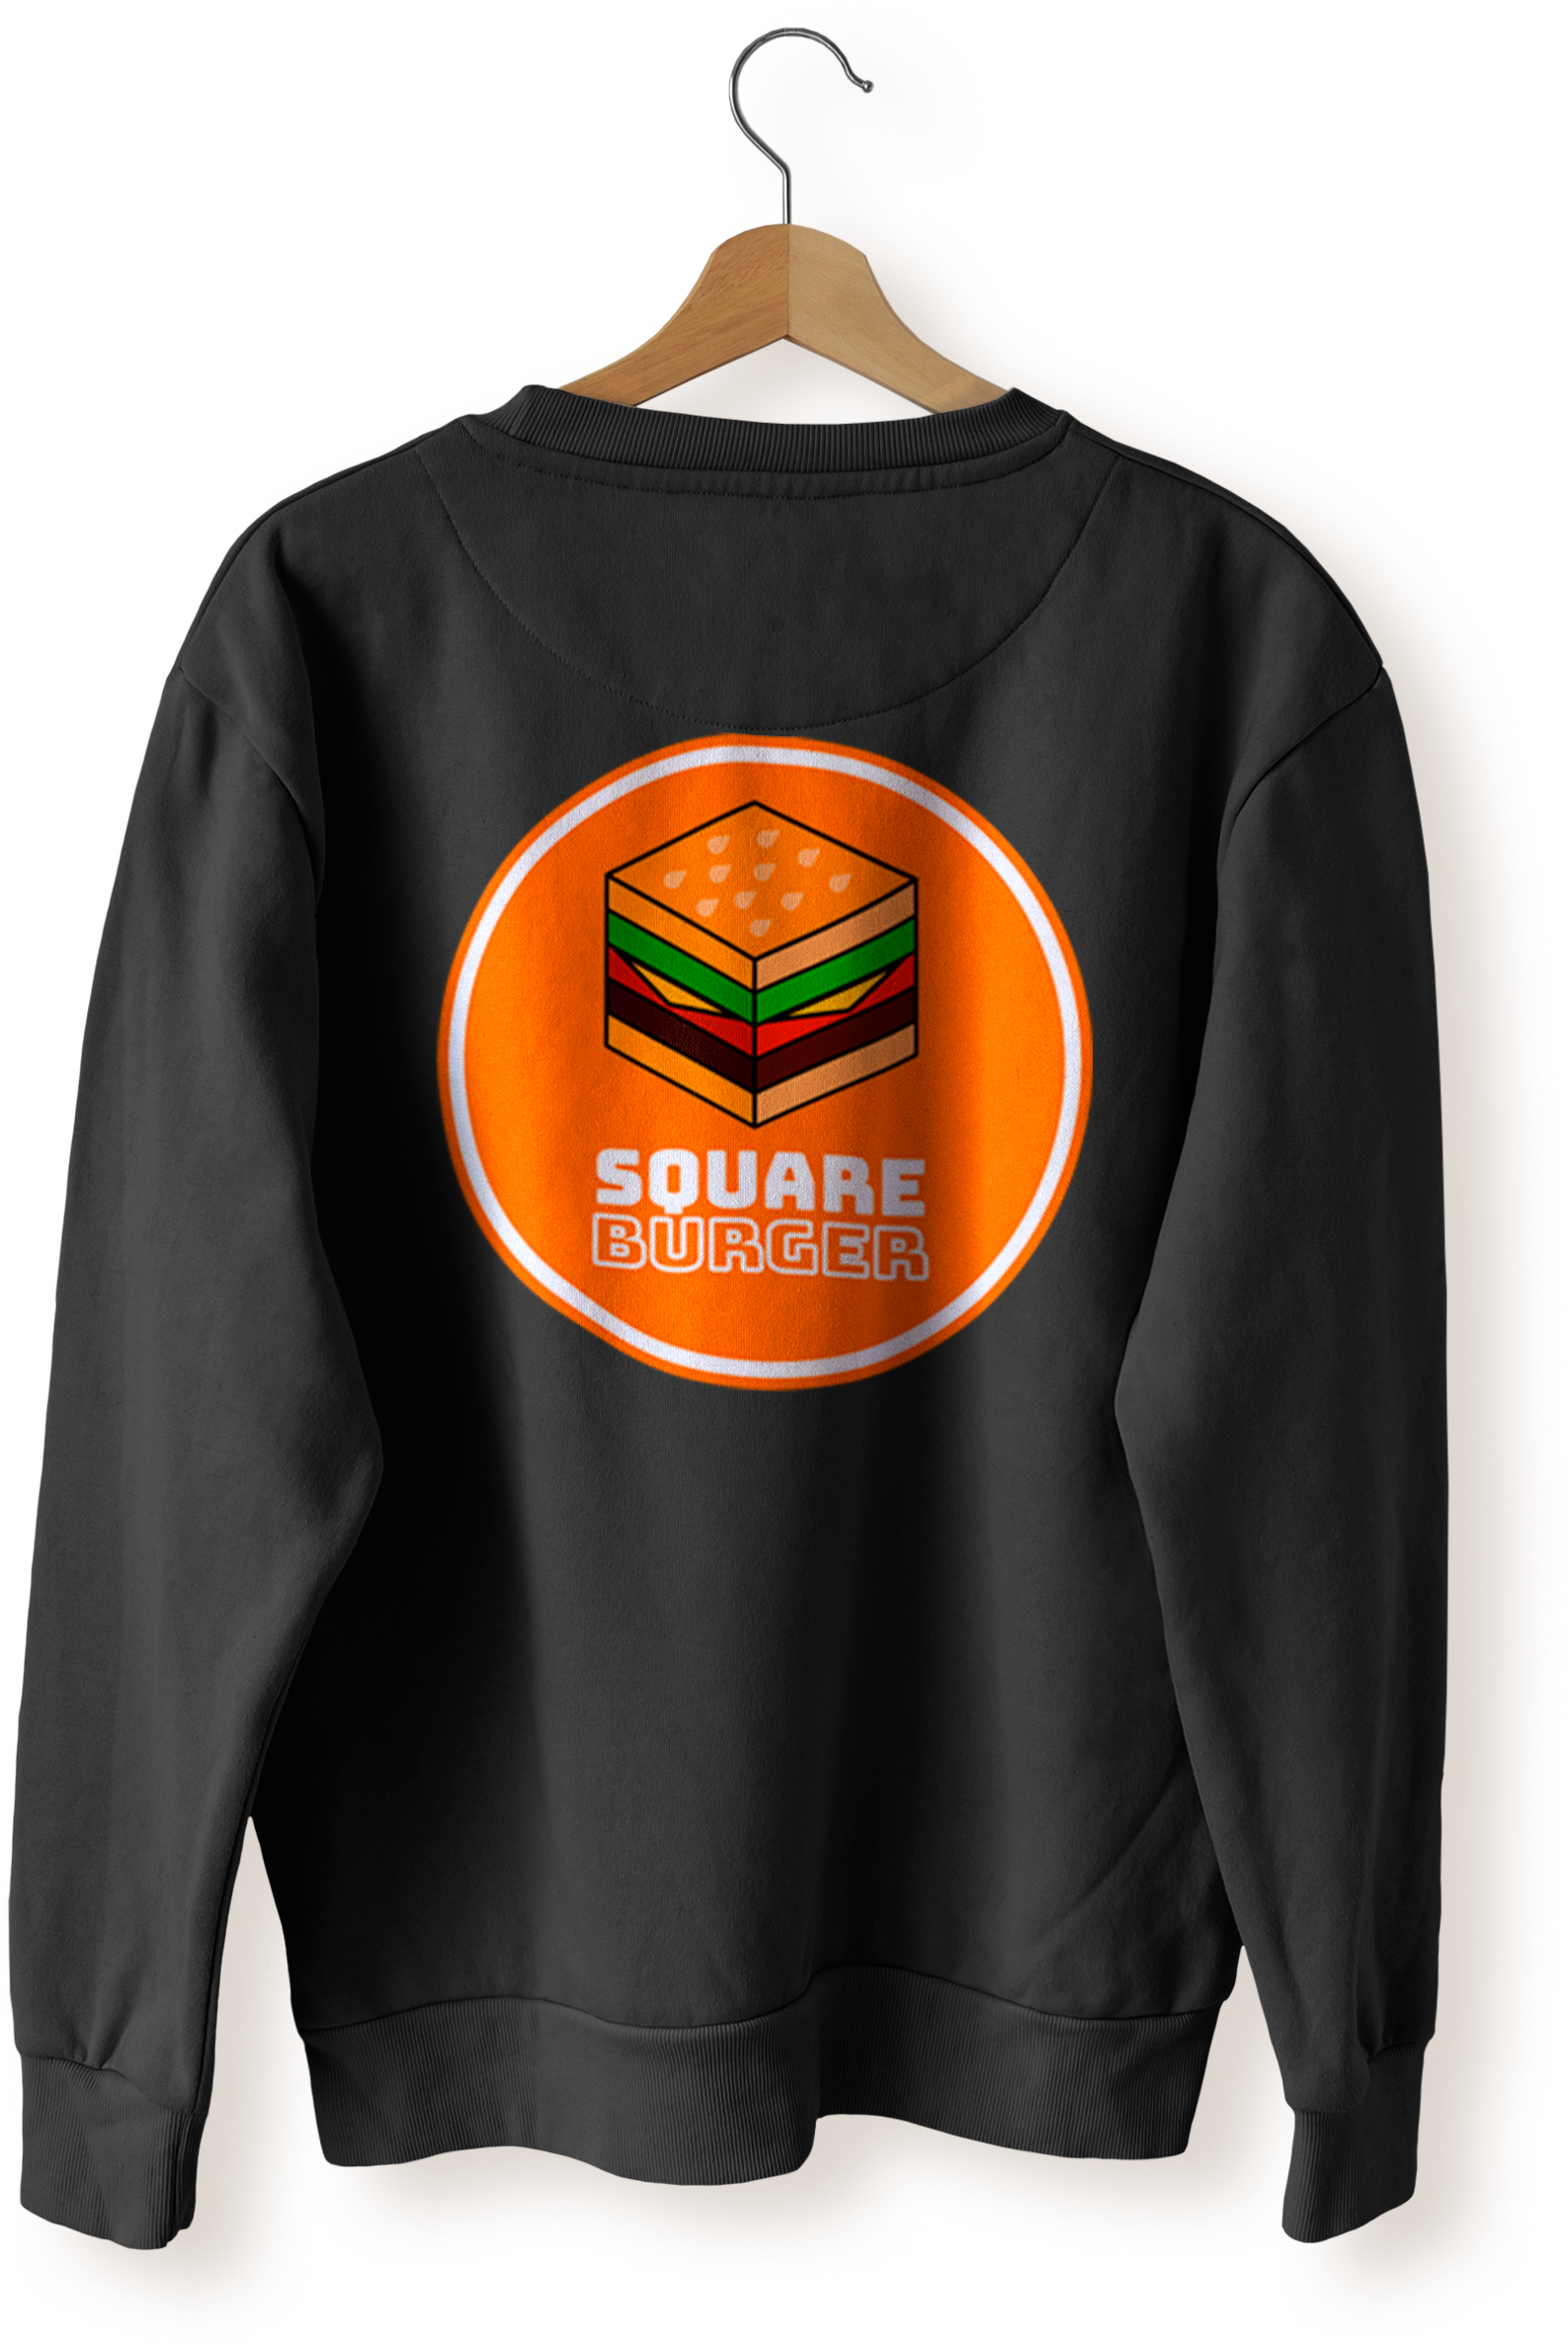 The back of a black sweatshirt with the Square Burger logo displayed large across the sweater.